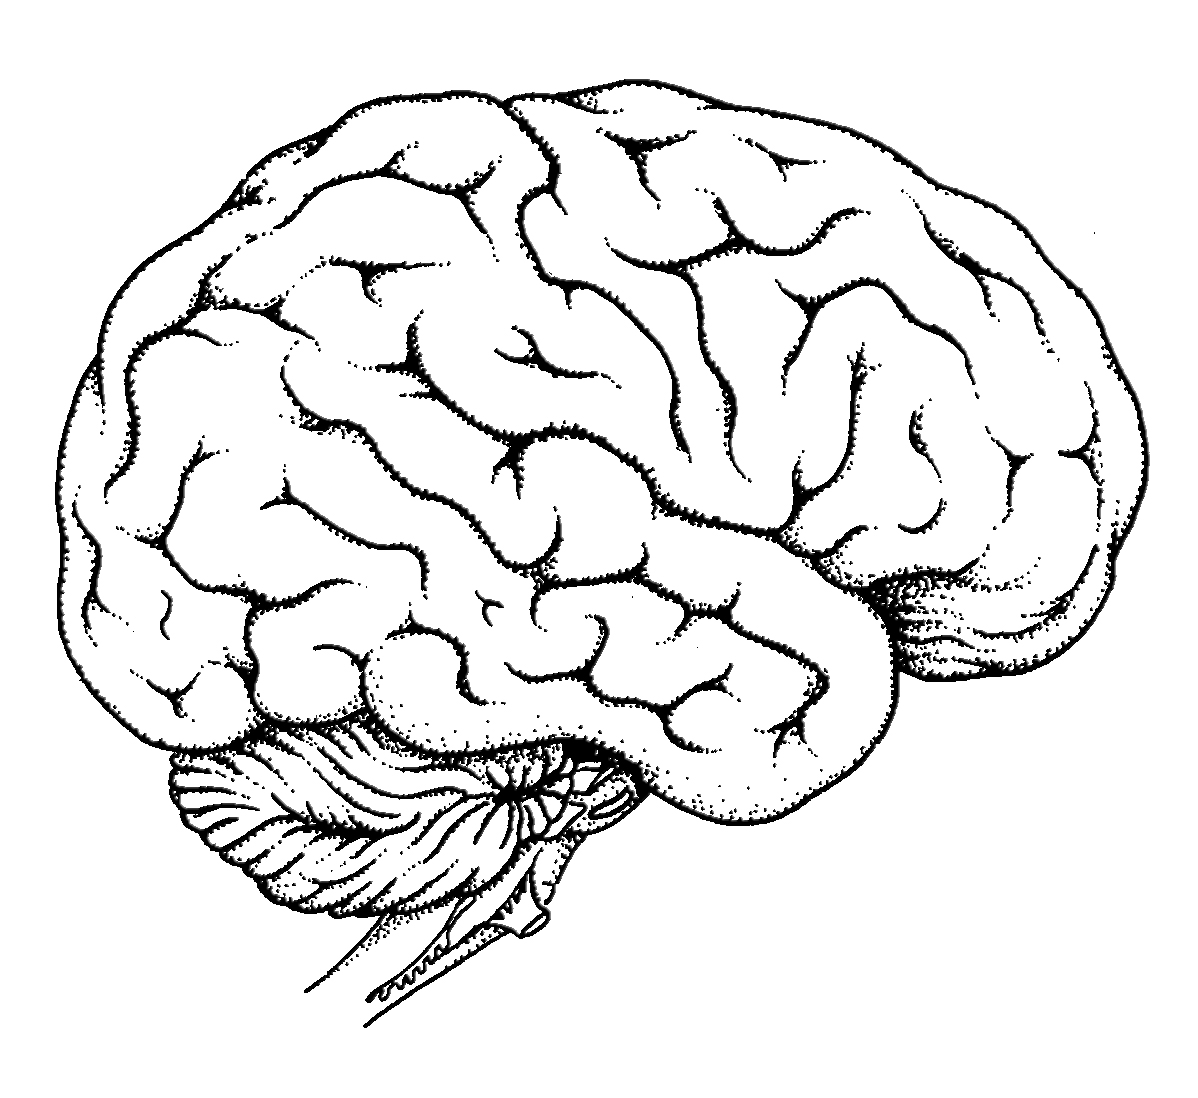 Brain Anatomy Coloring Pages at Free printable